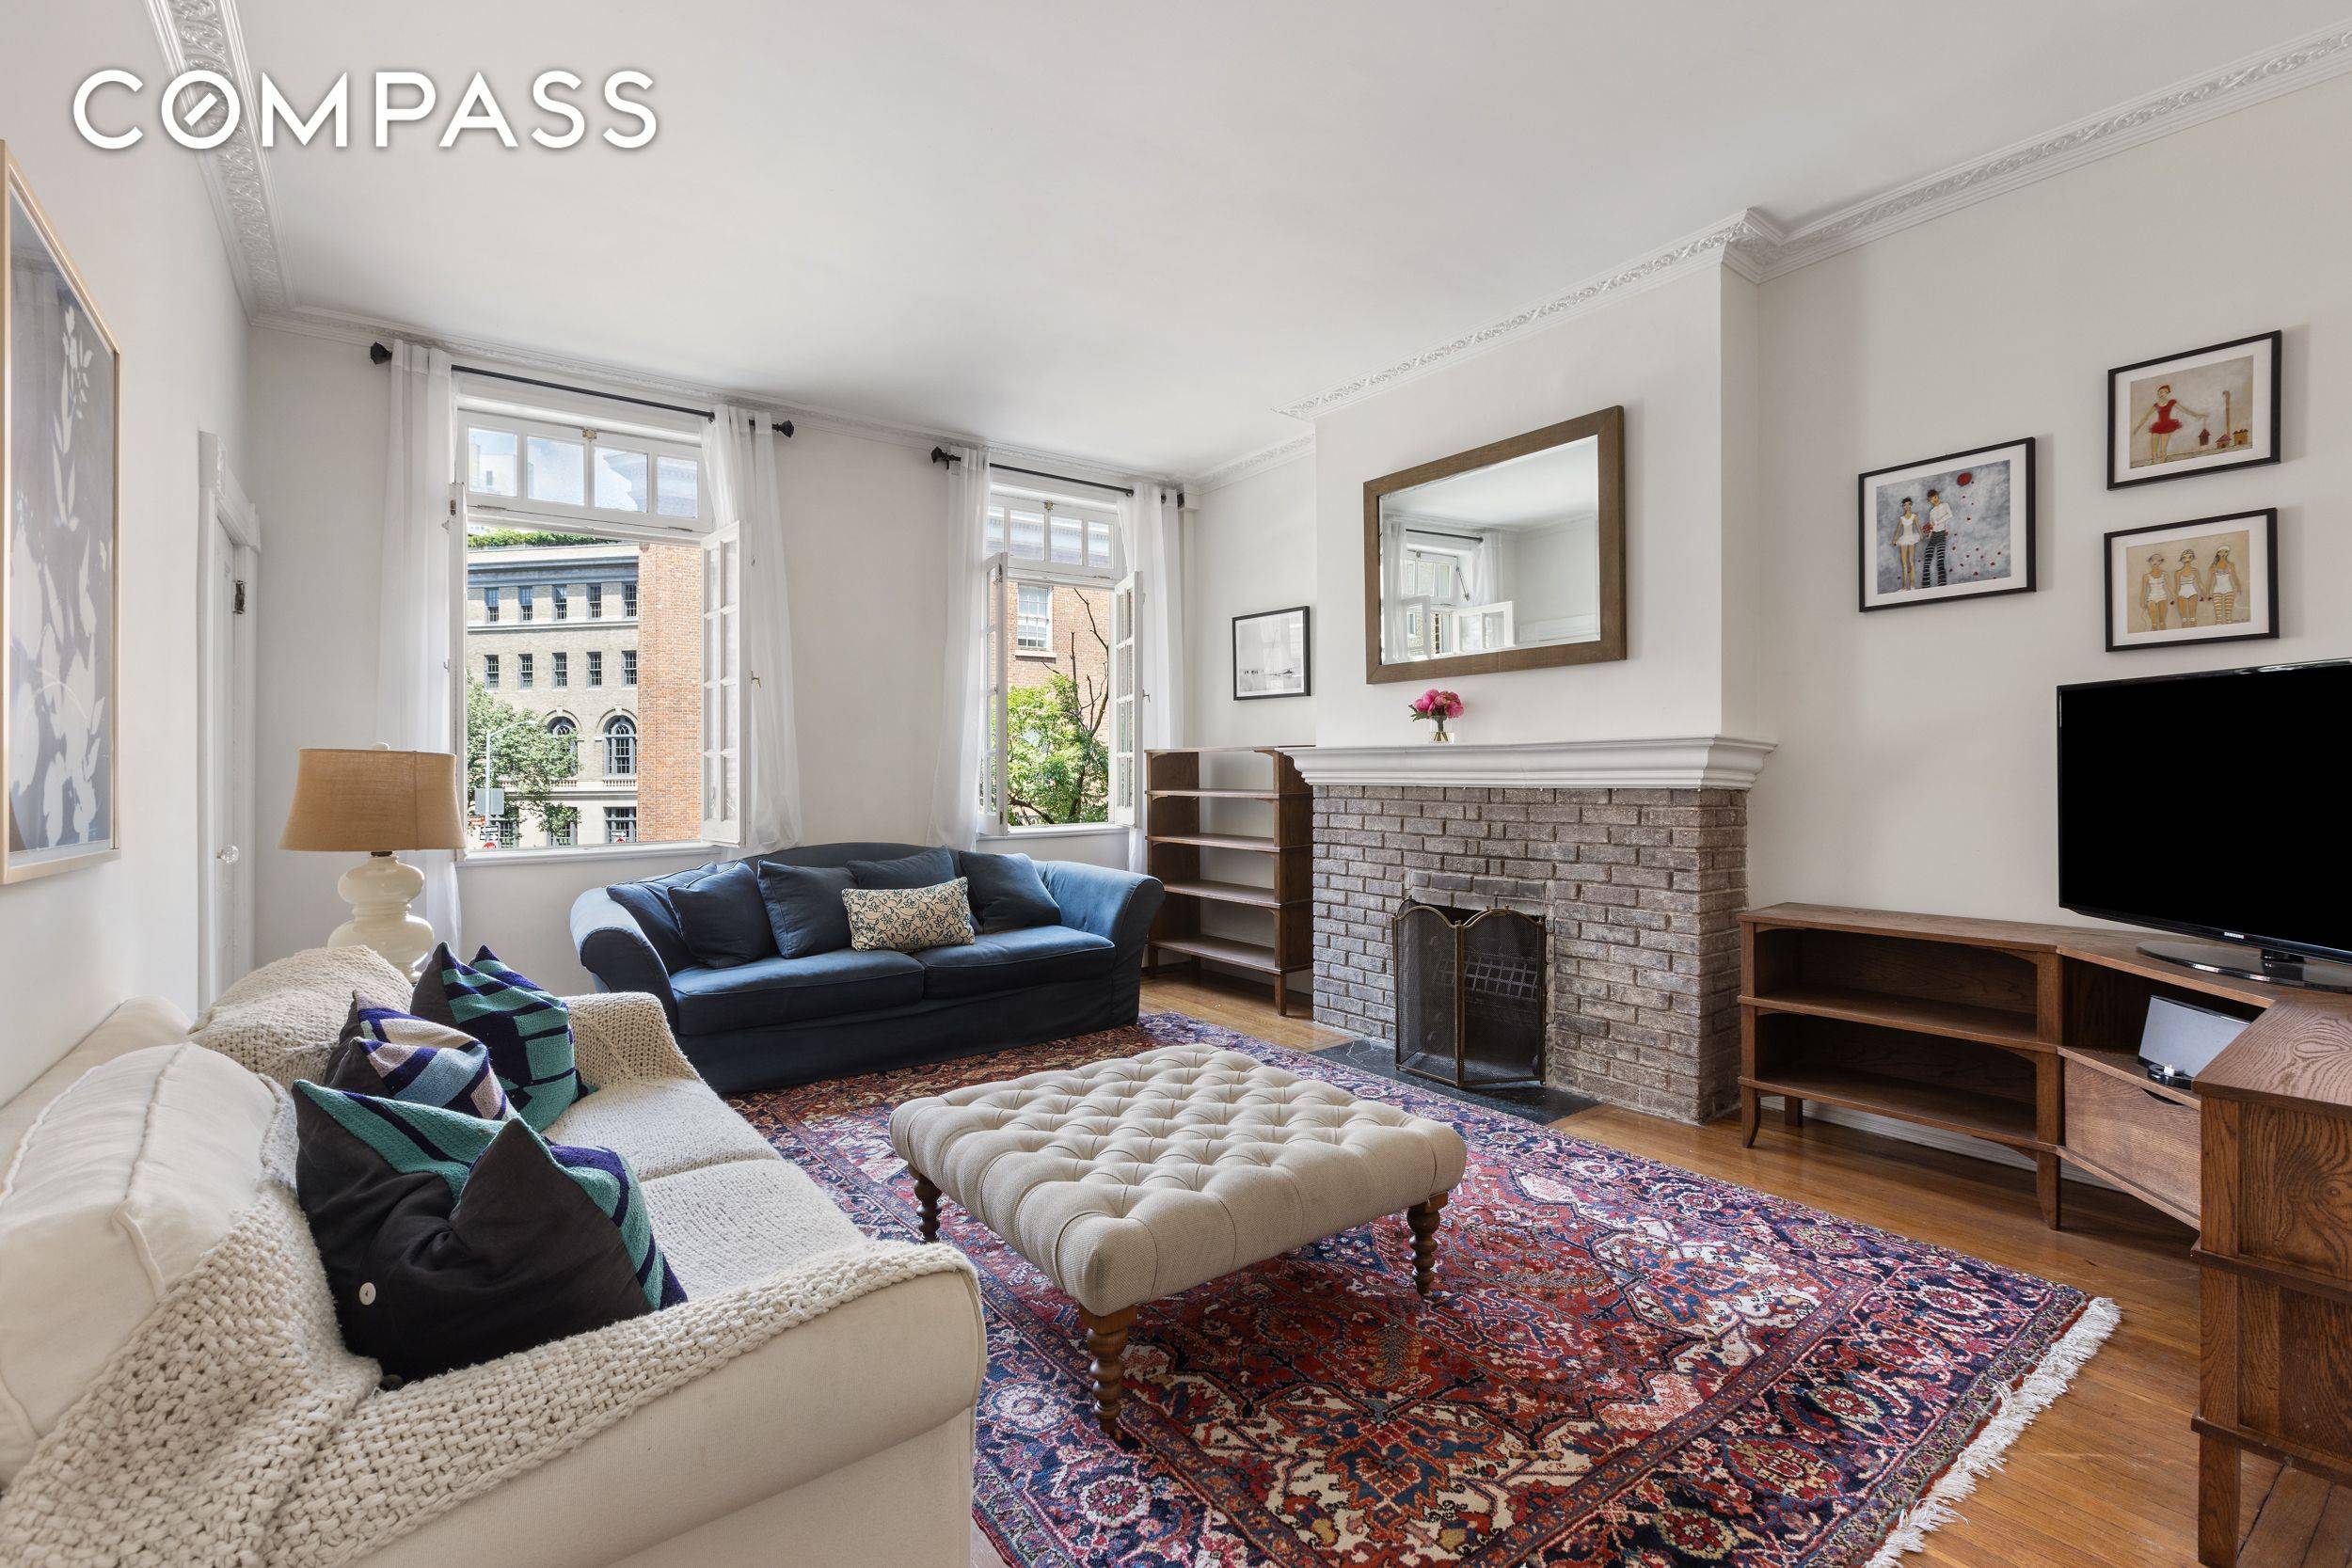 168 Waverly Pl is a distinguished 19th century 22 foot wide landmarked townhouse in the heart of the Village, perfectly positioned at the intersection of Greenwich and West Village.